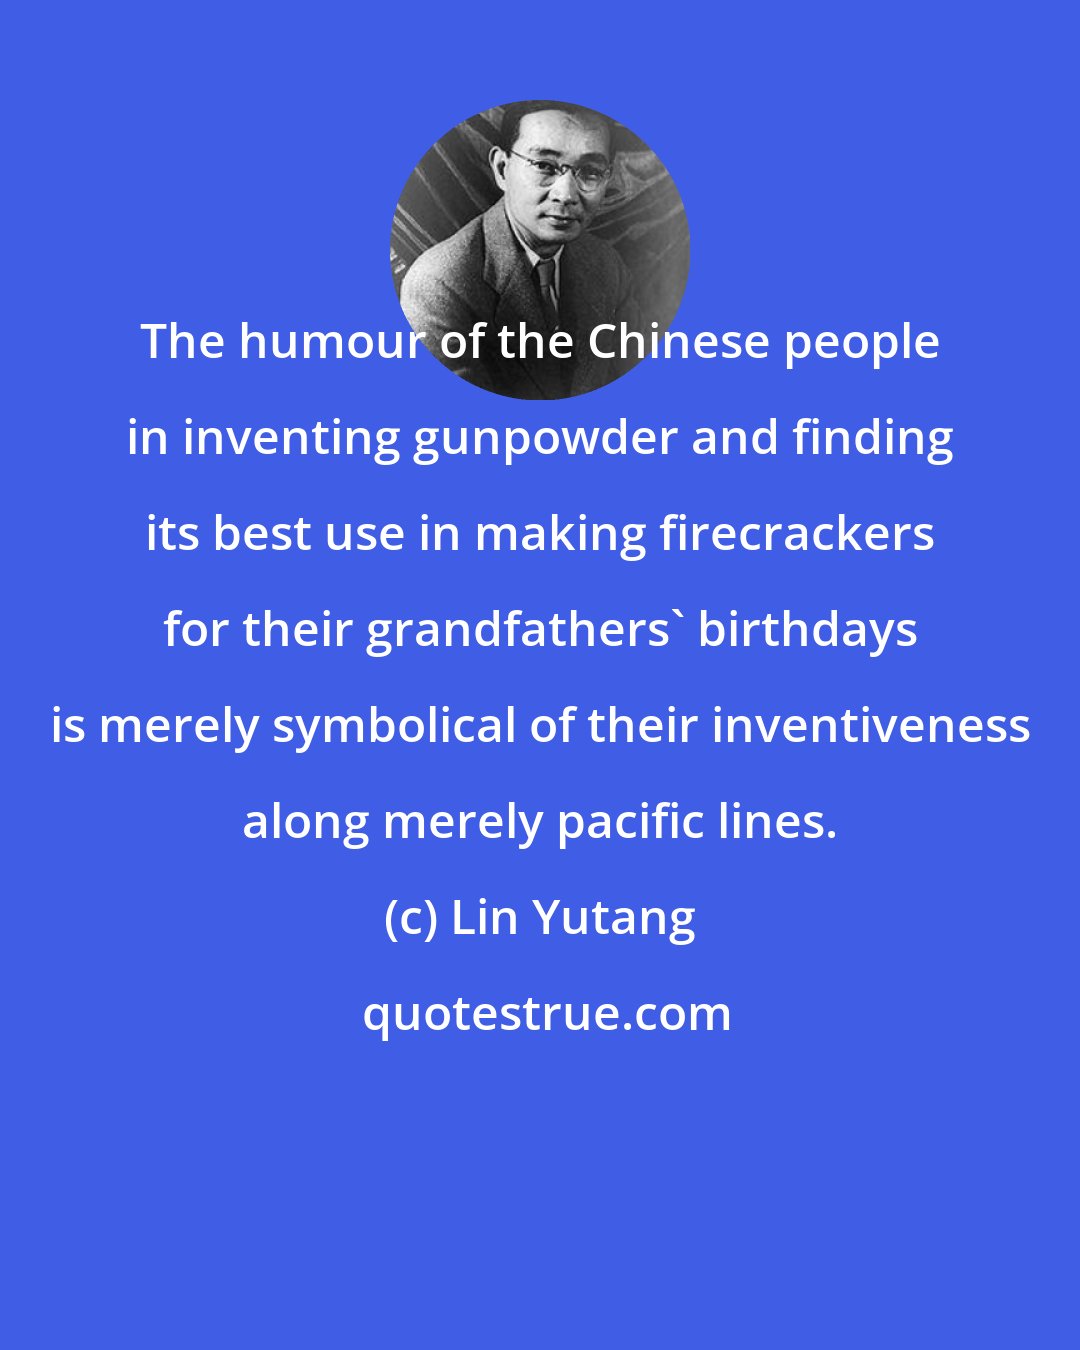 Lin Yutang: The humour of the Chinese people in inventing gunpowder and finding its best use in making firecrackers for their grandfathers' birthdays is merely symbolical of their inventiveness along merely pacific lines.